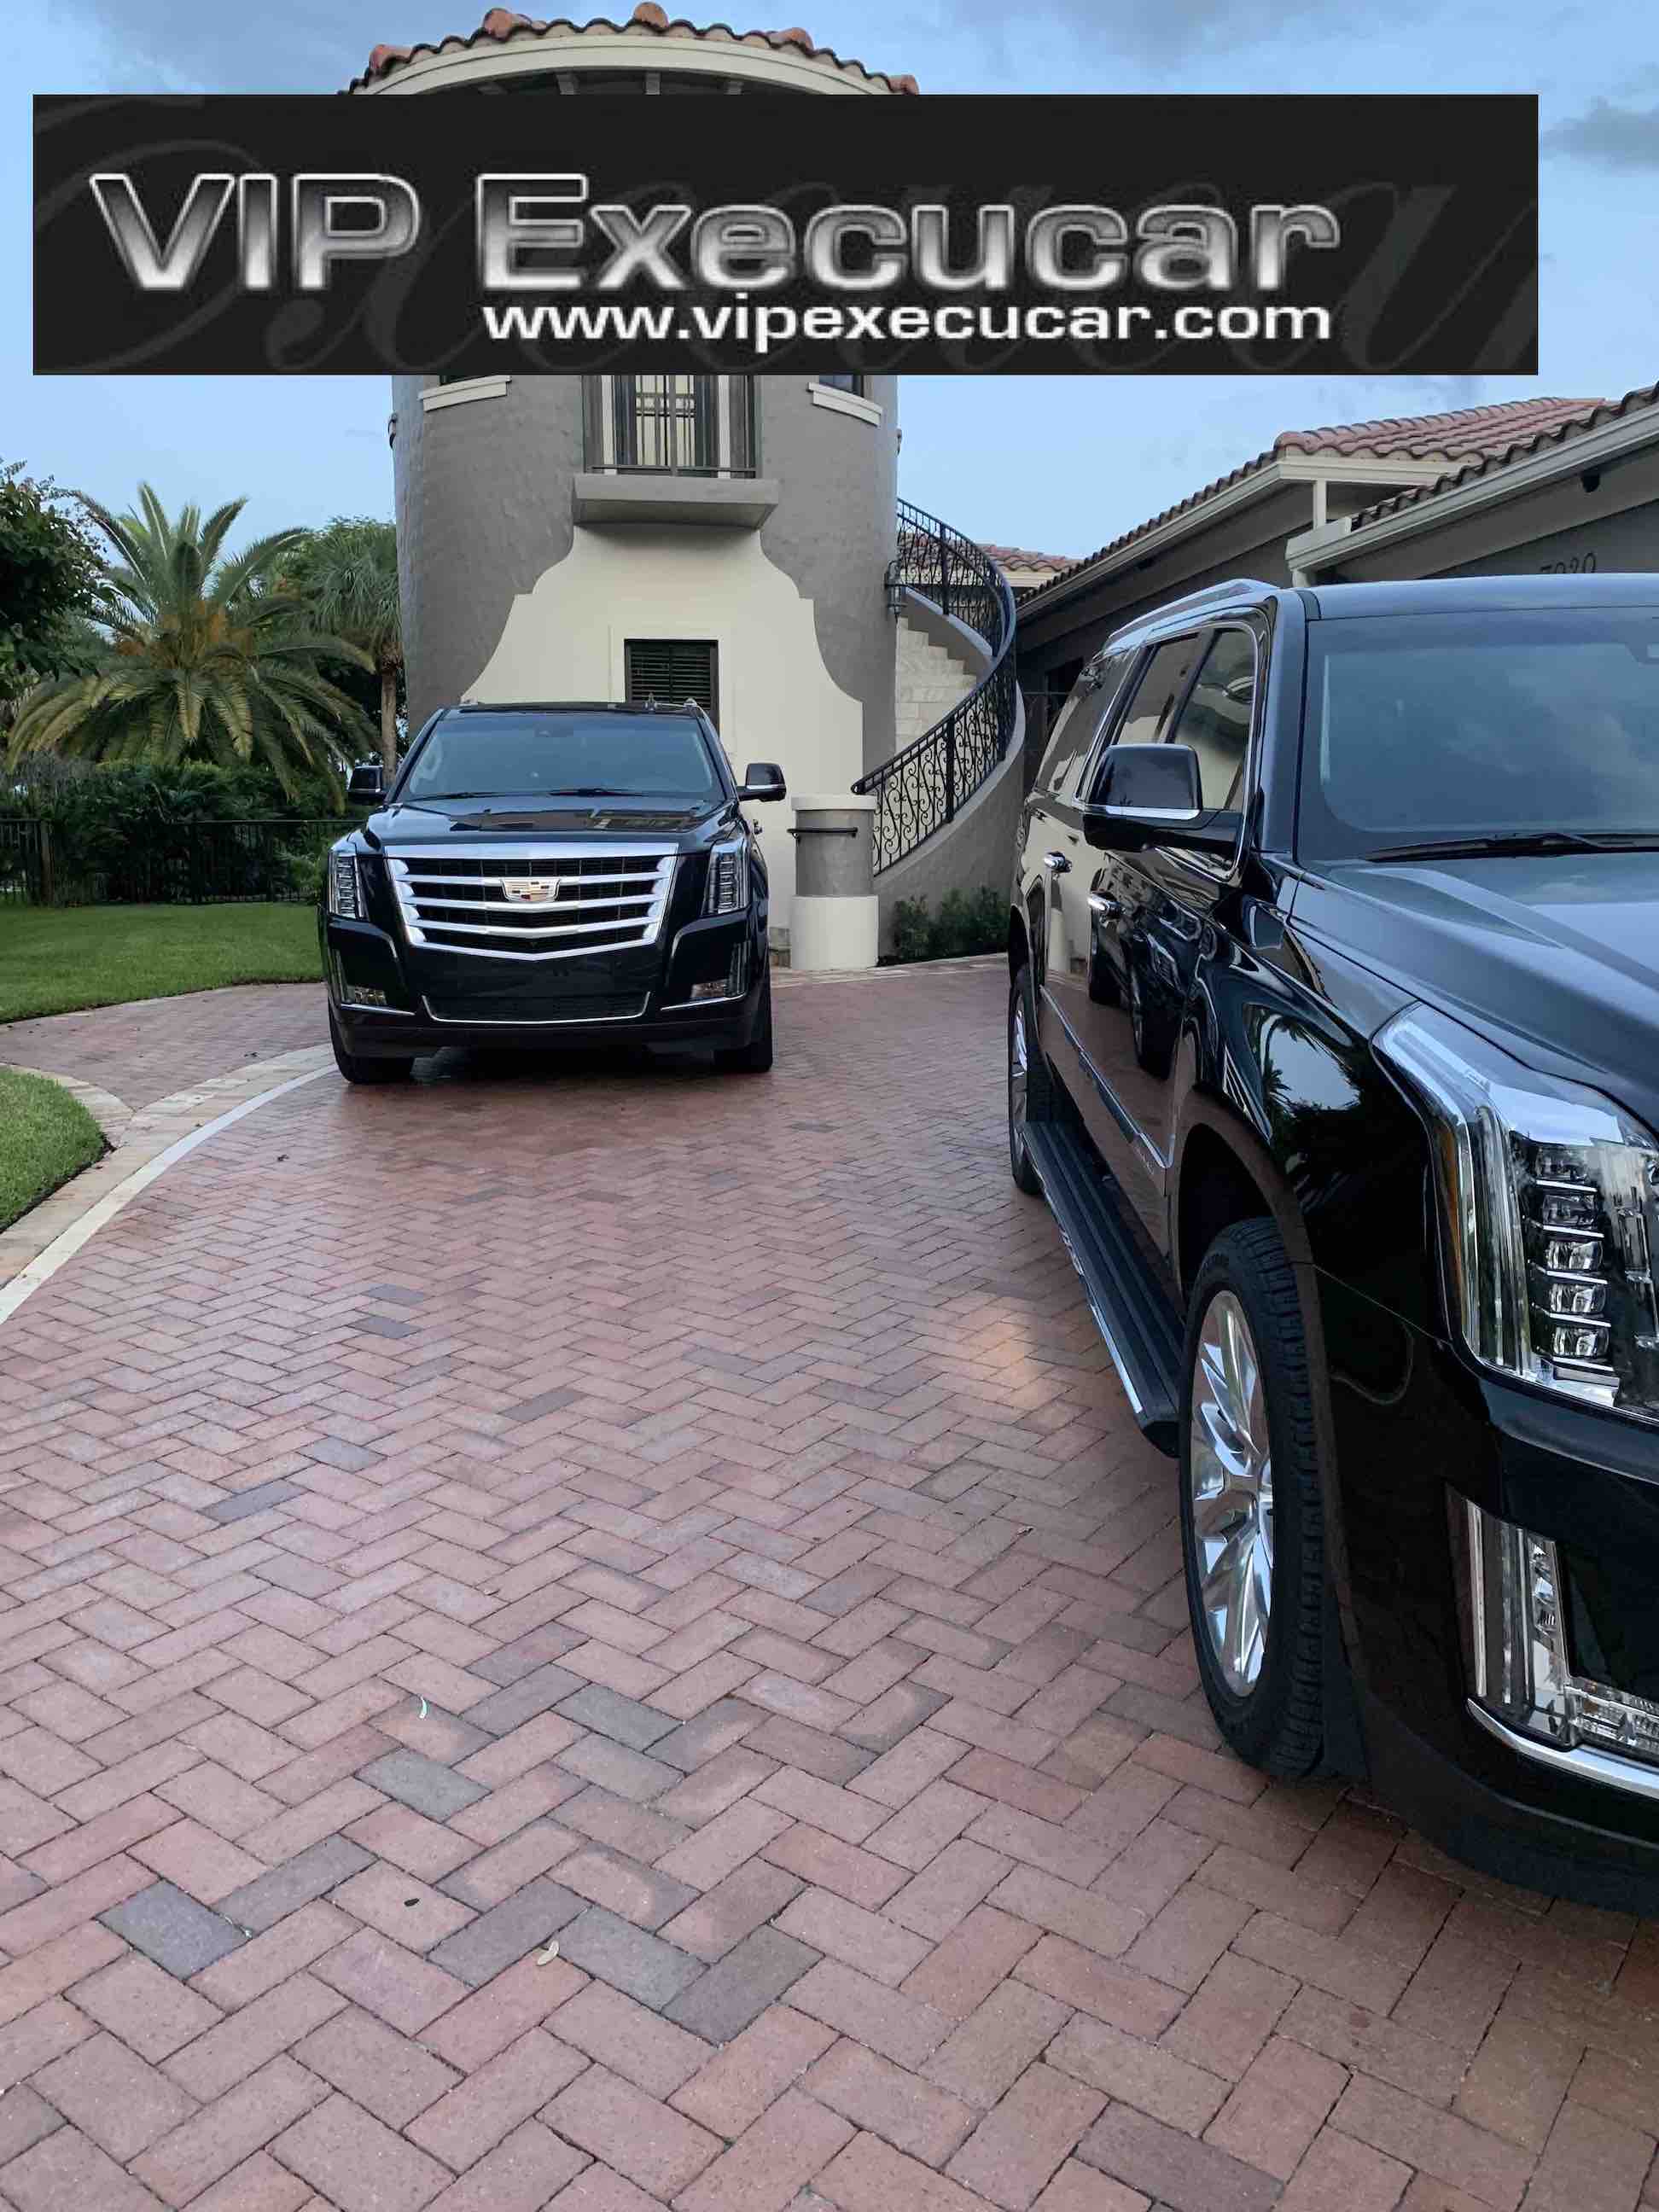 Luxury Limousines by Vip Execucar, provides premier transportation throughout the Brevard, Broward,Indian River County, Vero Beach, and 